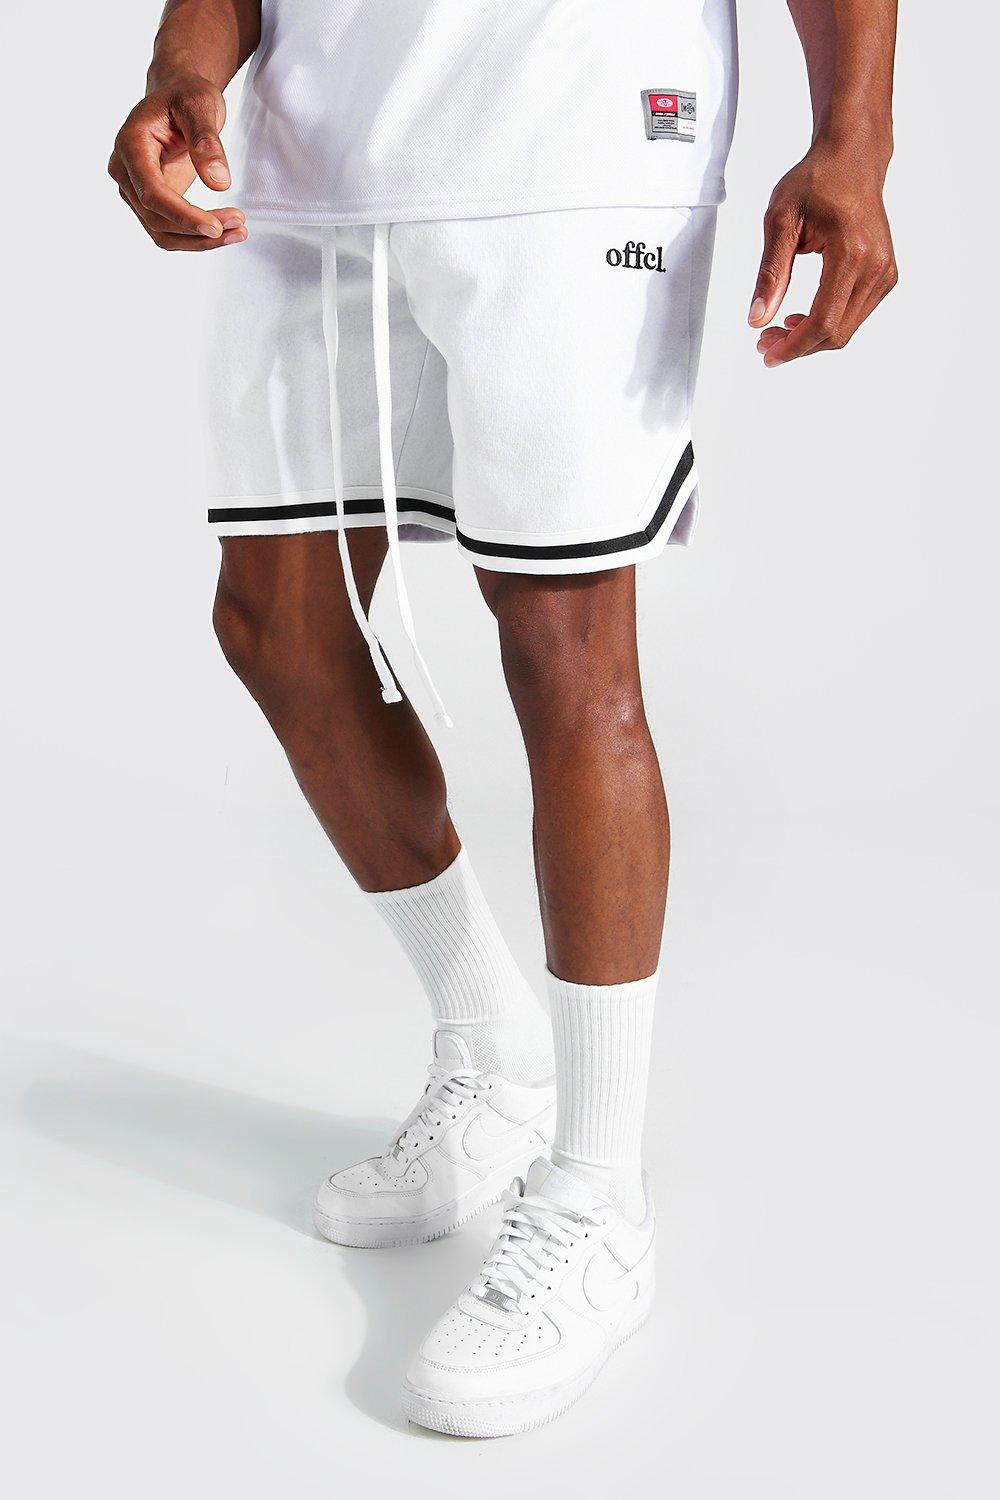 Mens White Offcl Basketball Jersey Shorts With Tape, White